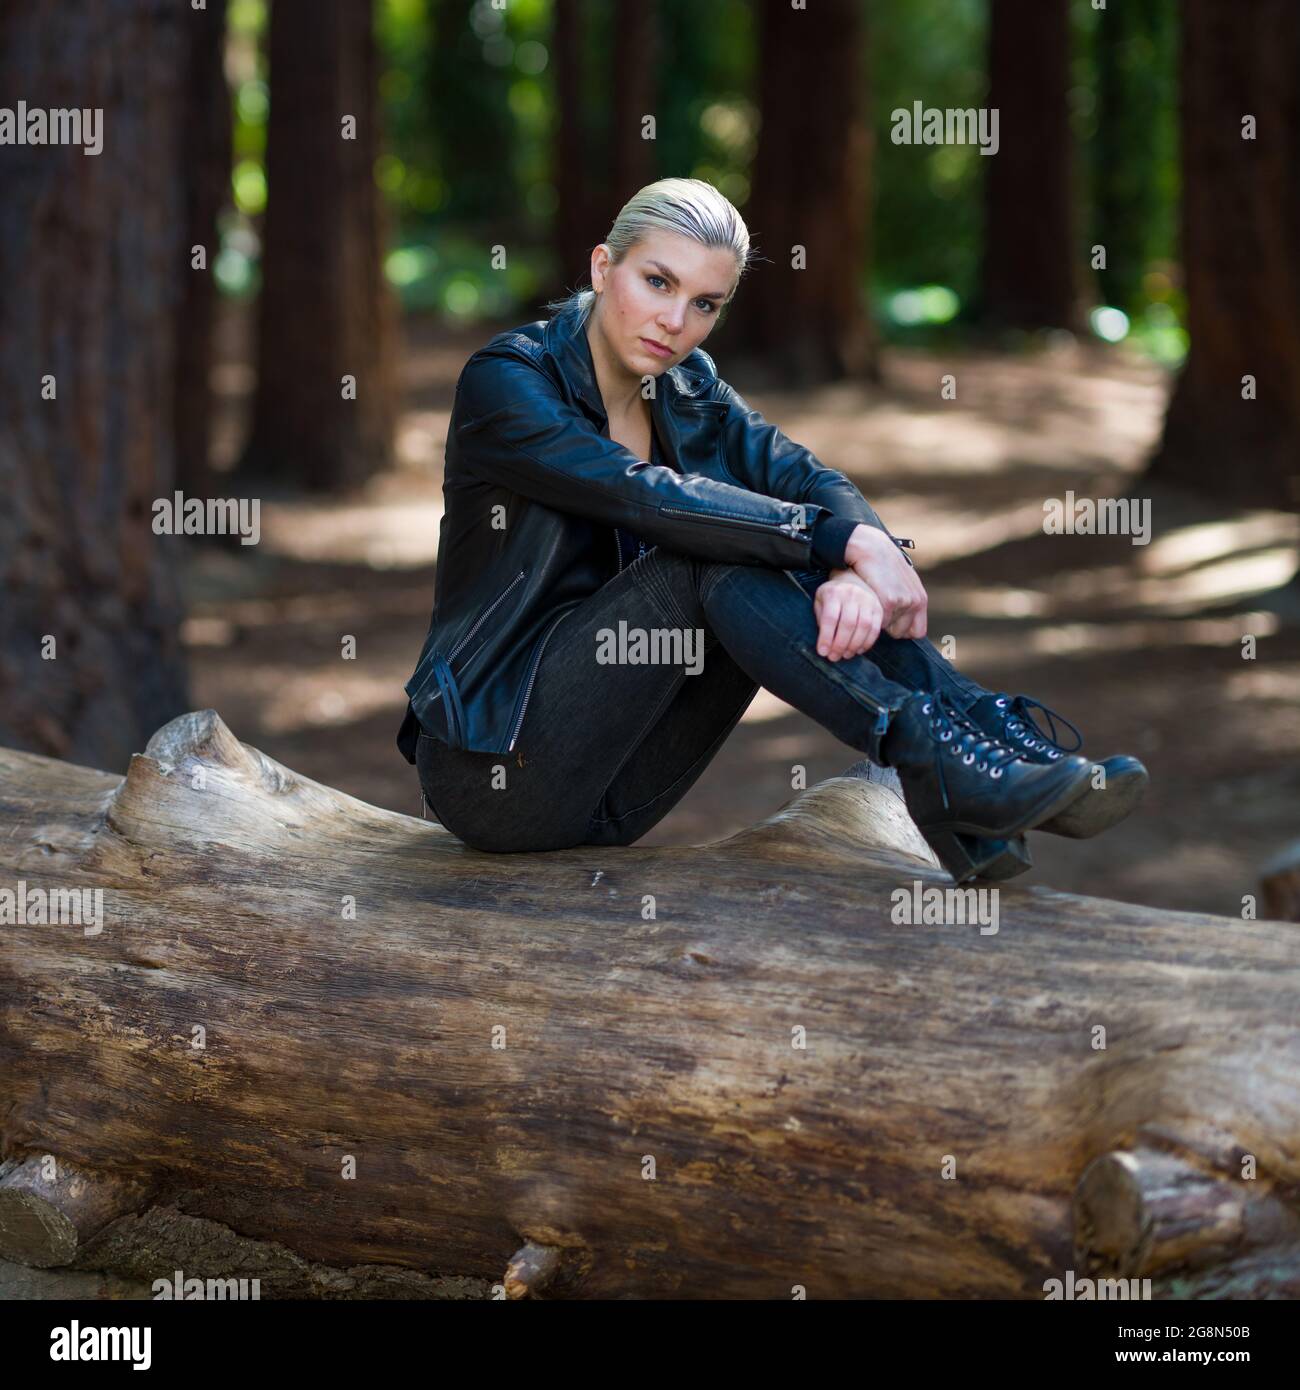 Young woman on large fallen redwood log in redwood grove Stock Photo